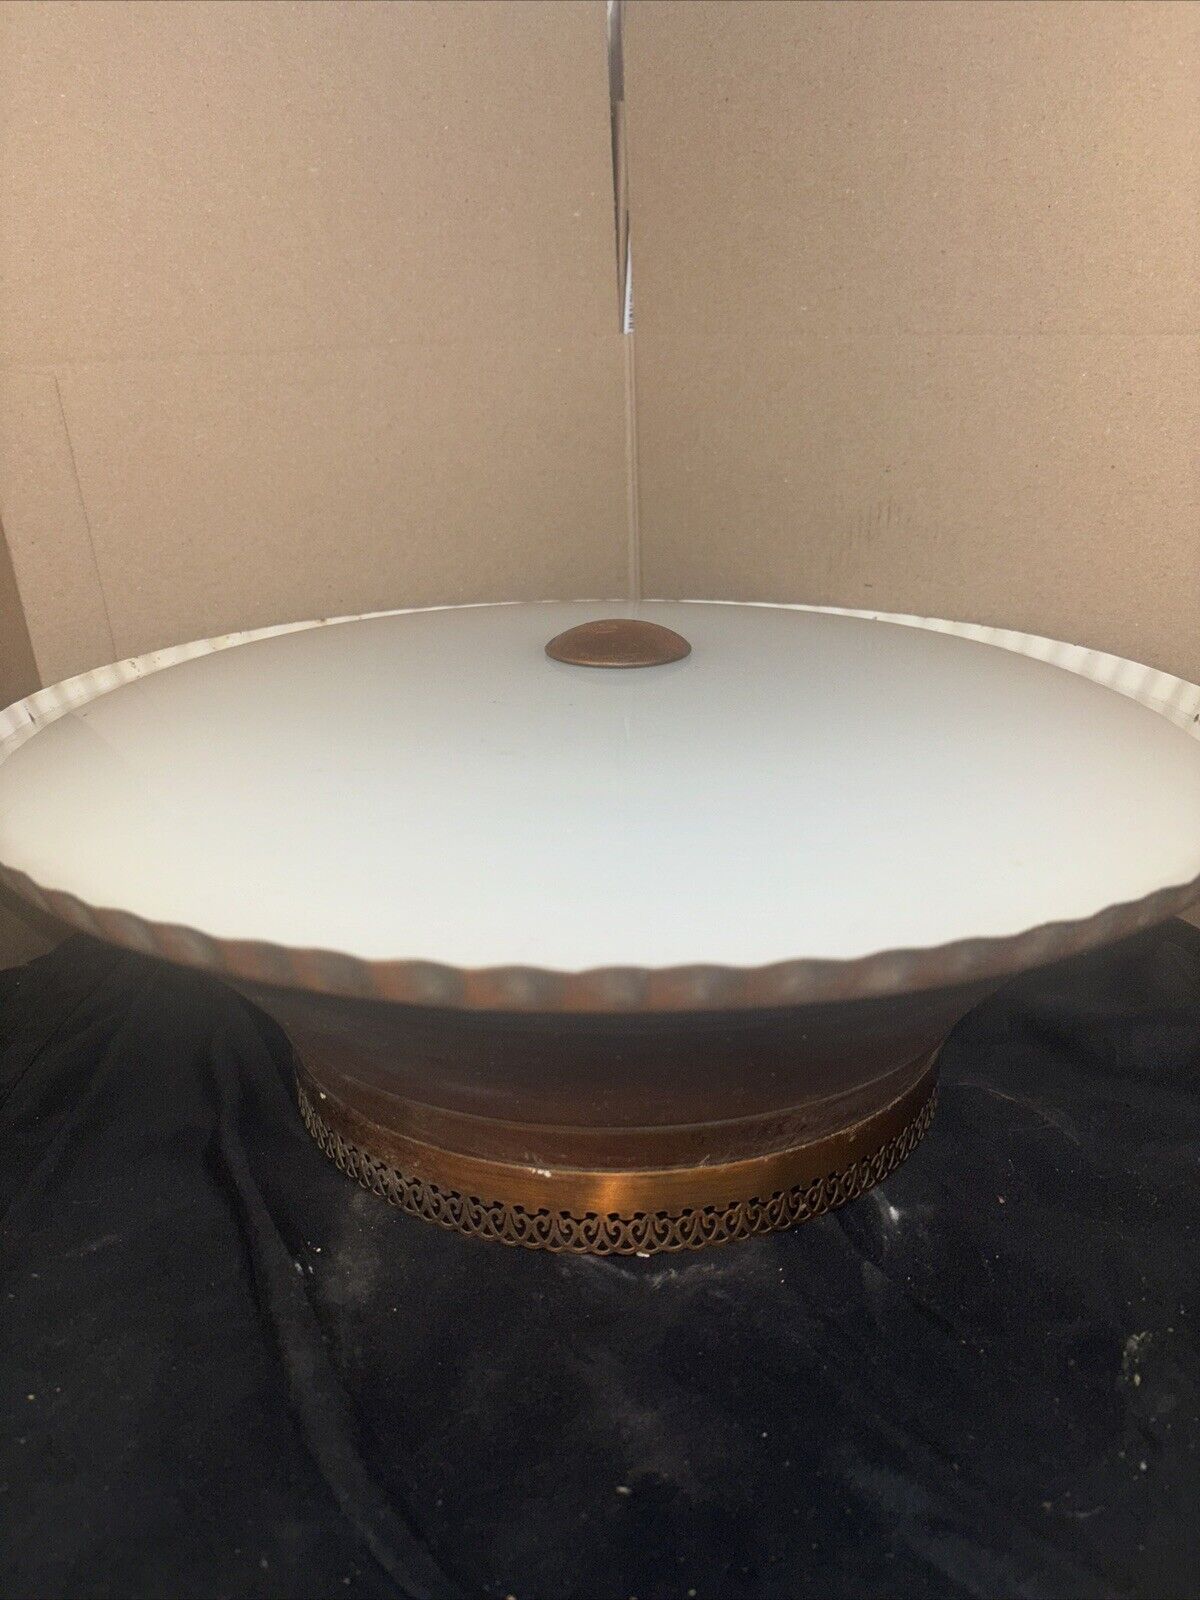 Vintage Mid Century Modern Flying Saucer - Ceiling Mounted Light Fixture